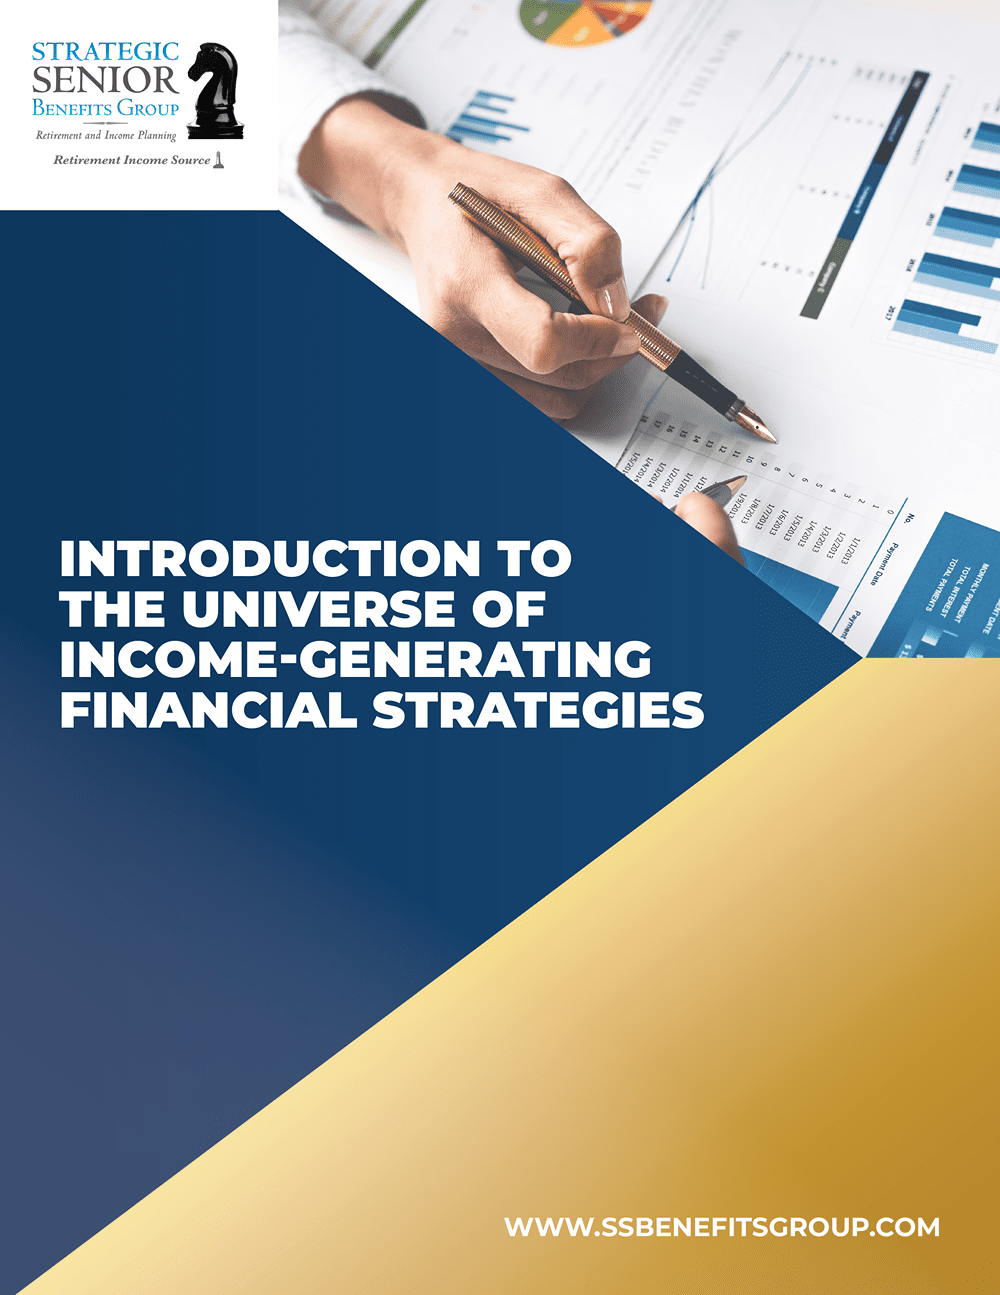 Strategic Senior Benefits Group - Introduction to the Universe of Income-Generating Financial Strategies-1